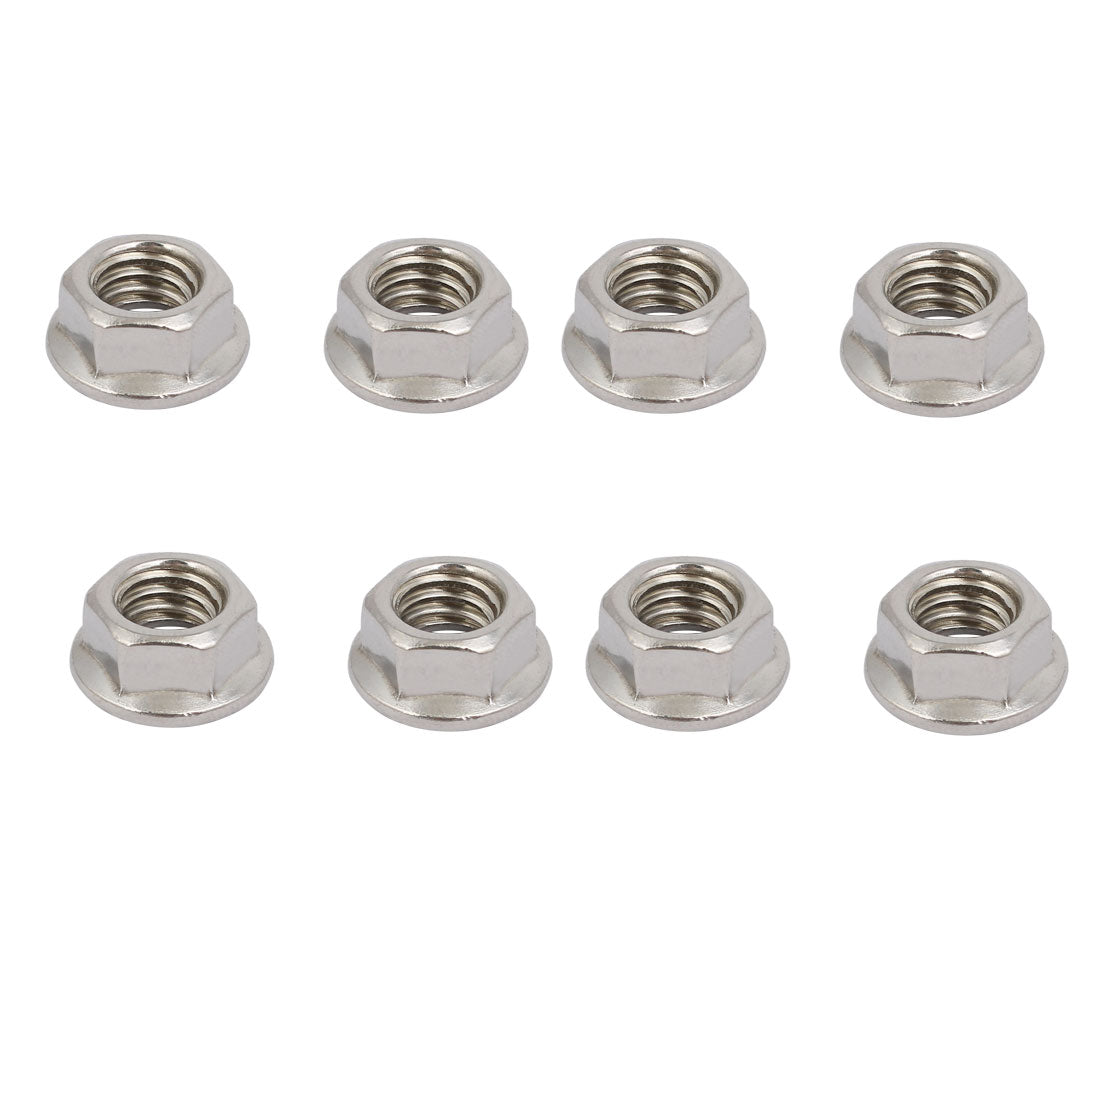 uxcell Uxcell 8pcs 3/8"-16 UNC Thread 304 Stainless Steel Hex Serrated Flange Nut Fastener